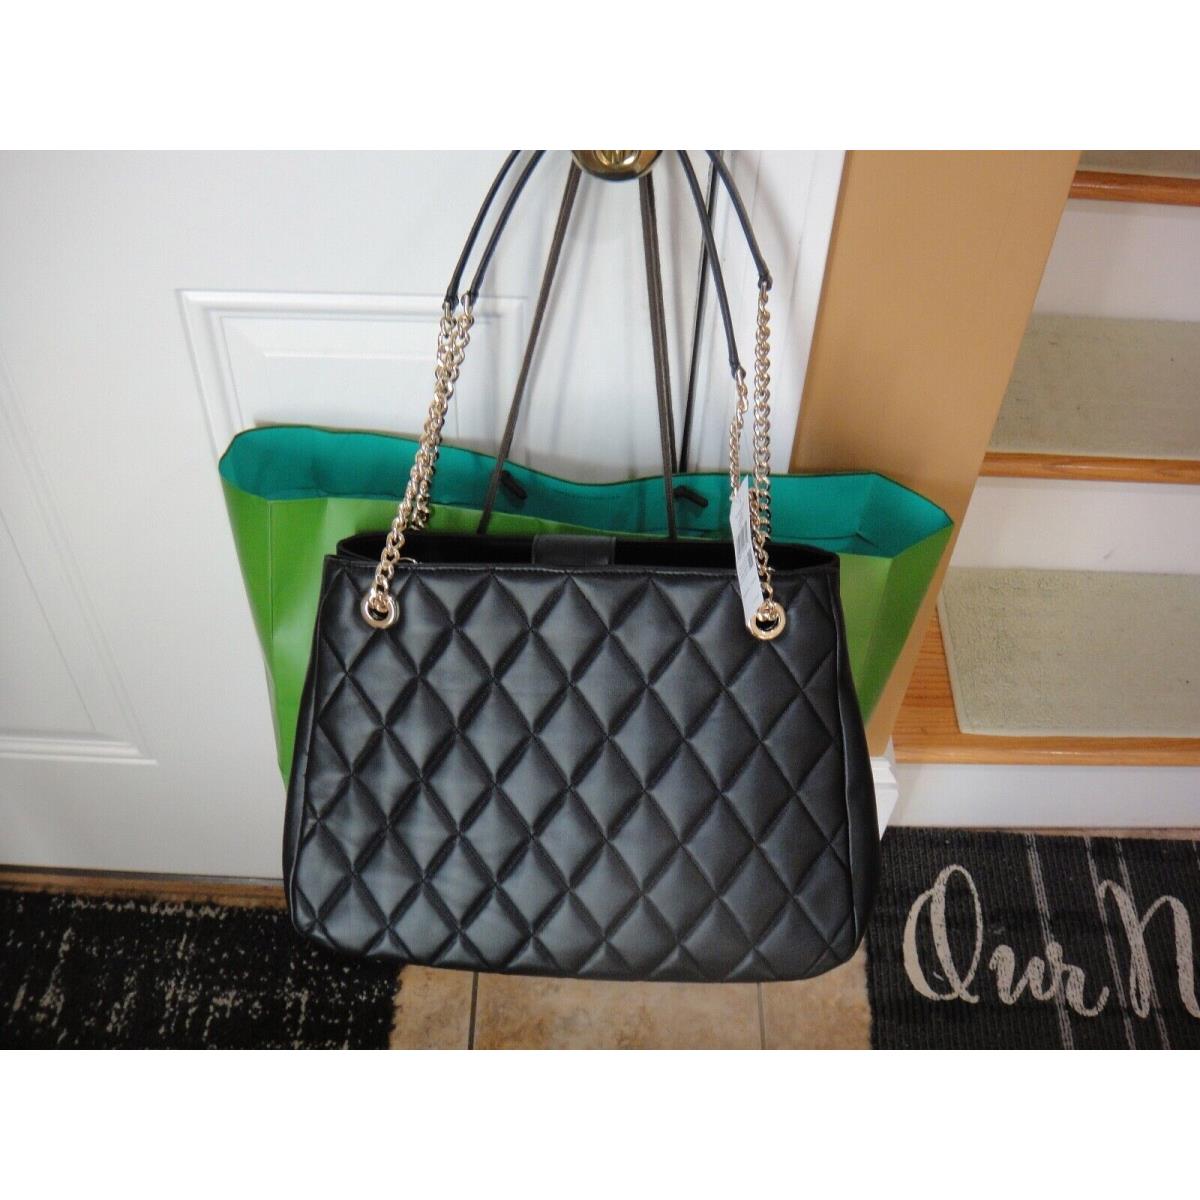 Kate Spade New York Carey Quilted Leather Large Tote Bag Chain Shoulder In  Black - Kate Spade bag - 196021216824